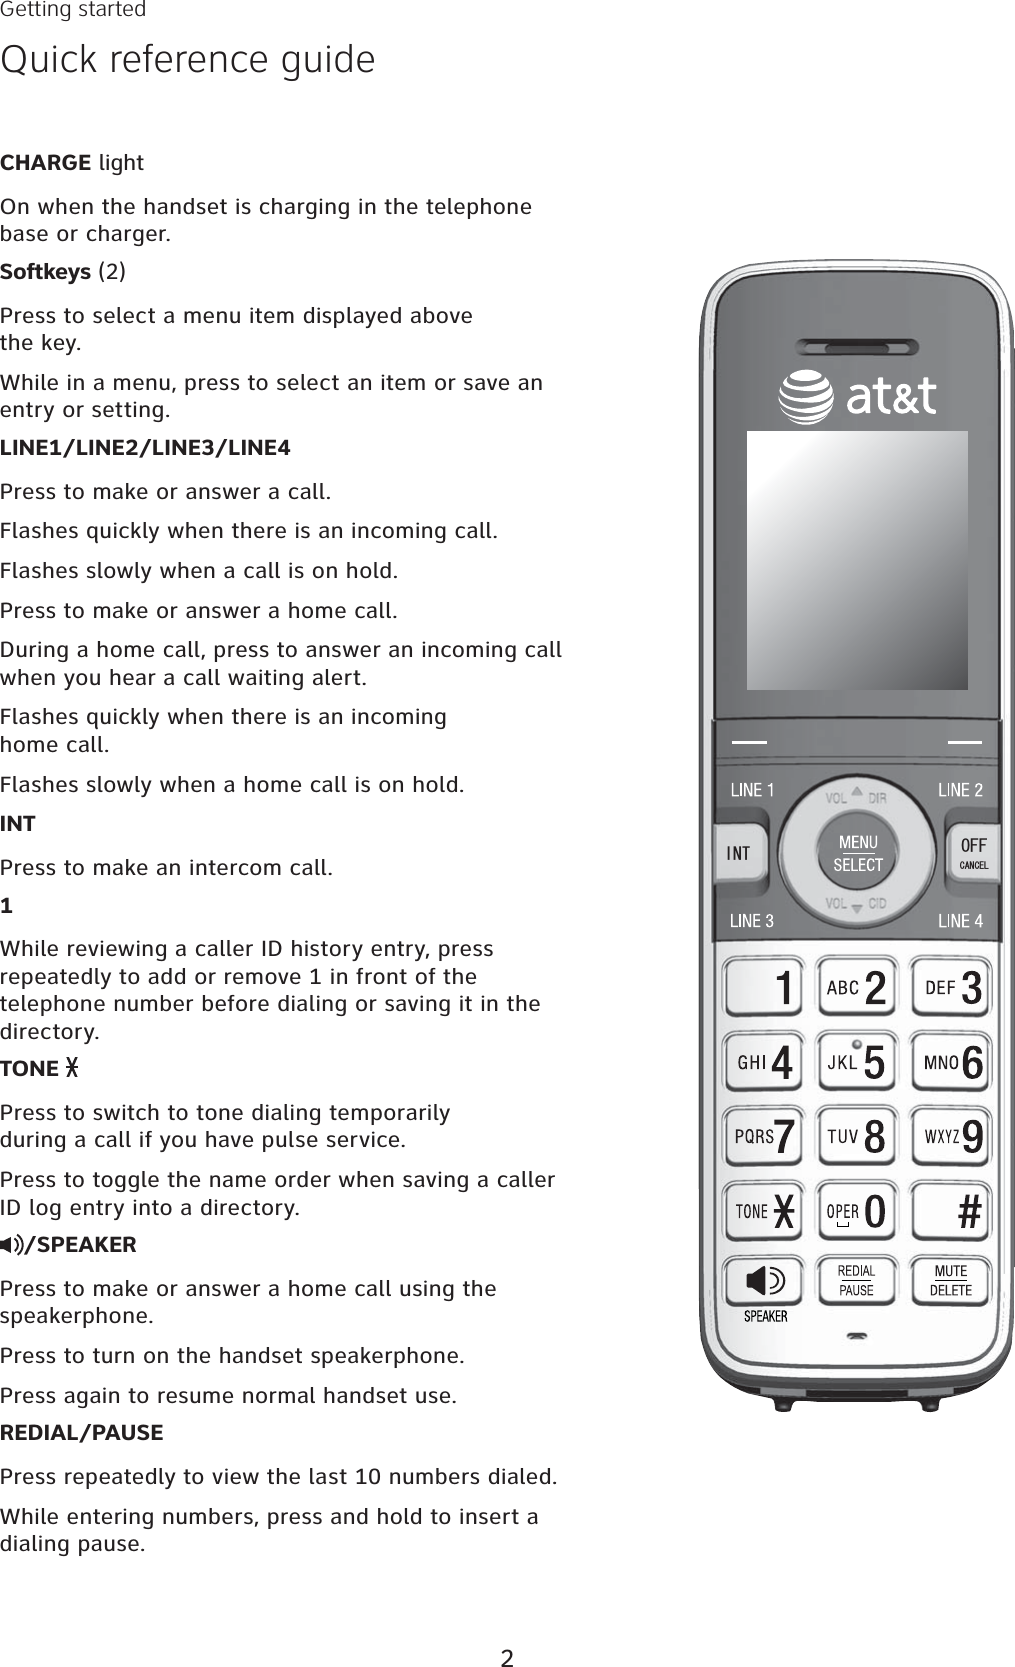 2Getting startedQuick reference guideCHARGE lightOn when the handset is charging in the telephone base or charger.Softkeys (2)Press to select a menu item displayed above the key.While in a menu, press to select an item or save an entry or setting.LINE1/LINE2/LINE3/LINE4Press to make or answer a call.Flashes quickly when there is an incoming call.Flashes slowly when a call is on hold.Press to make or answer a home call.During a home call, press to answer an incoming call when you hear a call waiting alert.Flashes quickly when there is an incoming home call.Flashes slowly when a home call is on hold.INTPress to make an intercom call.1While reviewing a caller ID history entry, press repeatedly to add or remove 1 in front of the telephone number before dialing or saving it in the directory.TONE Press to switch to tone dialing temporarily during a call if you have pulse service.Press to toggle the name order when saving a caller ID log entry into a directory./SPEAKERPress to make or answer a home call using the speakerphone.Press to turn on the handset speakerphone.Press again to resume normal handset use.REDIAL/PAUSEPress repeatedly to view the last 10 numbers dialed.While entering numbers, press and hold to insert a dialing pause.+06 1((%#0%&apos;.